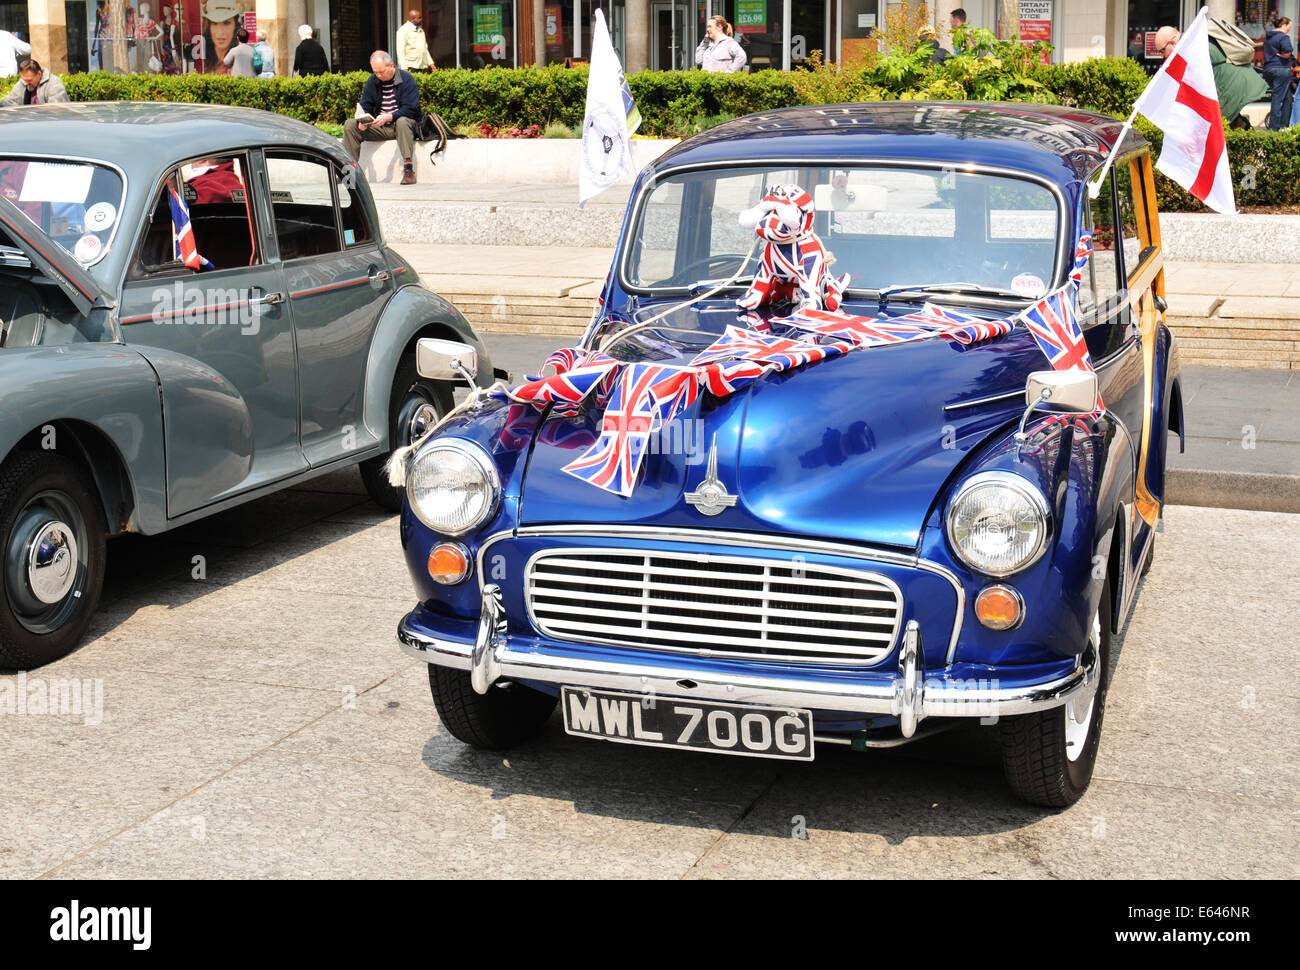 NOTTINGHAM, UK - APRIL 29, 2011: Vintage cars on display in the Old Market Place during the Vintage Cars Festival Stock Photo